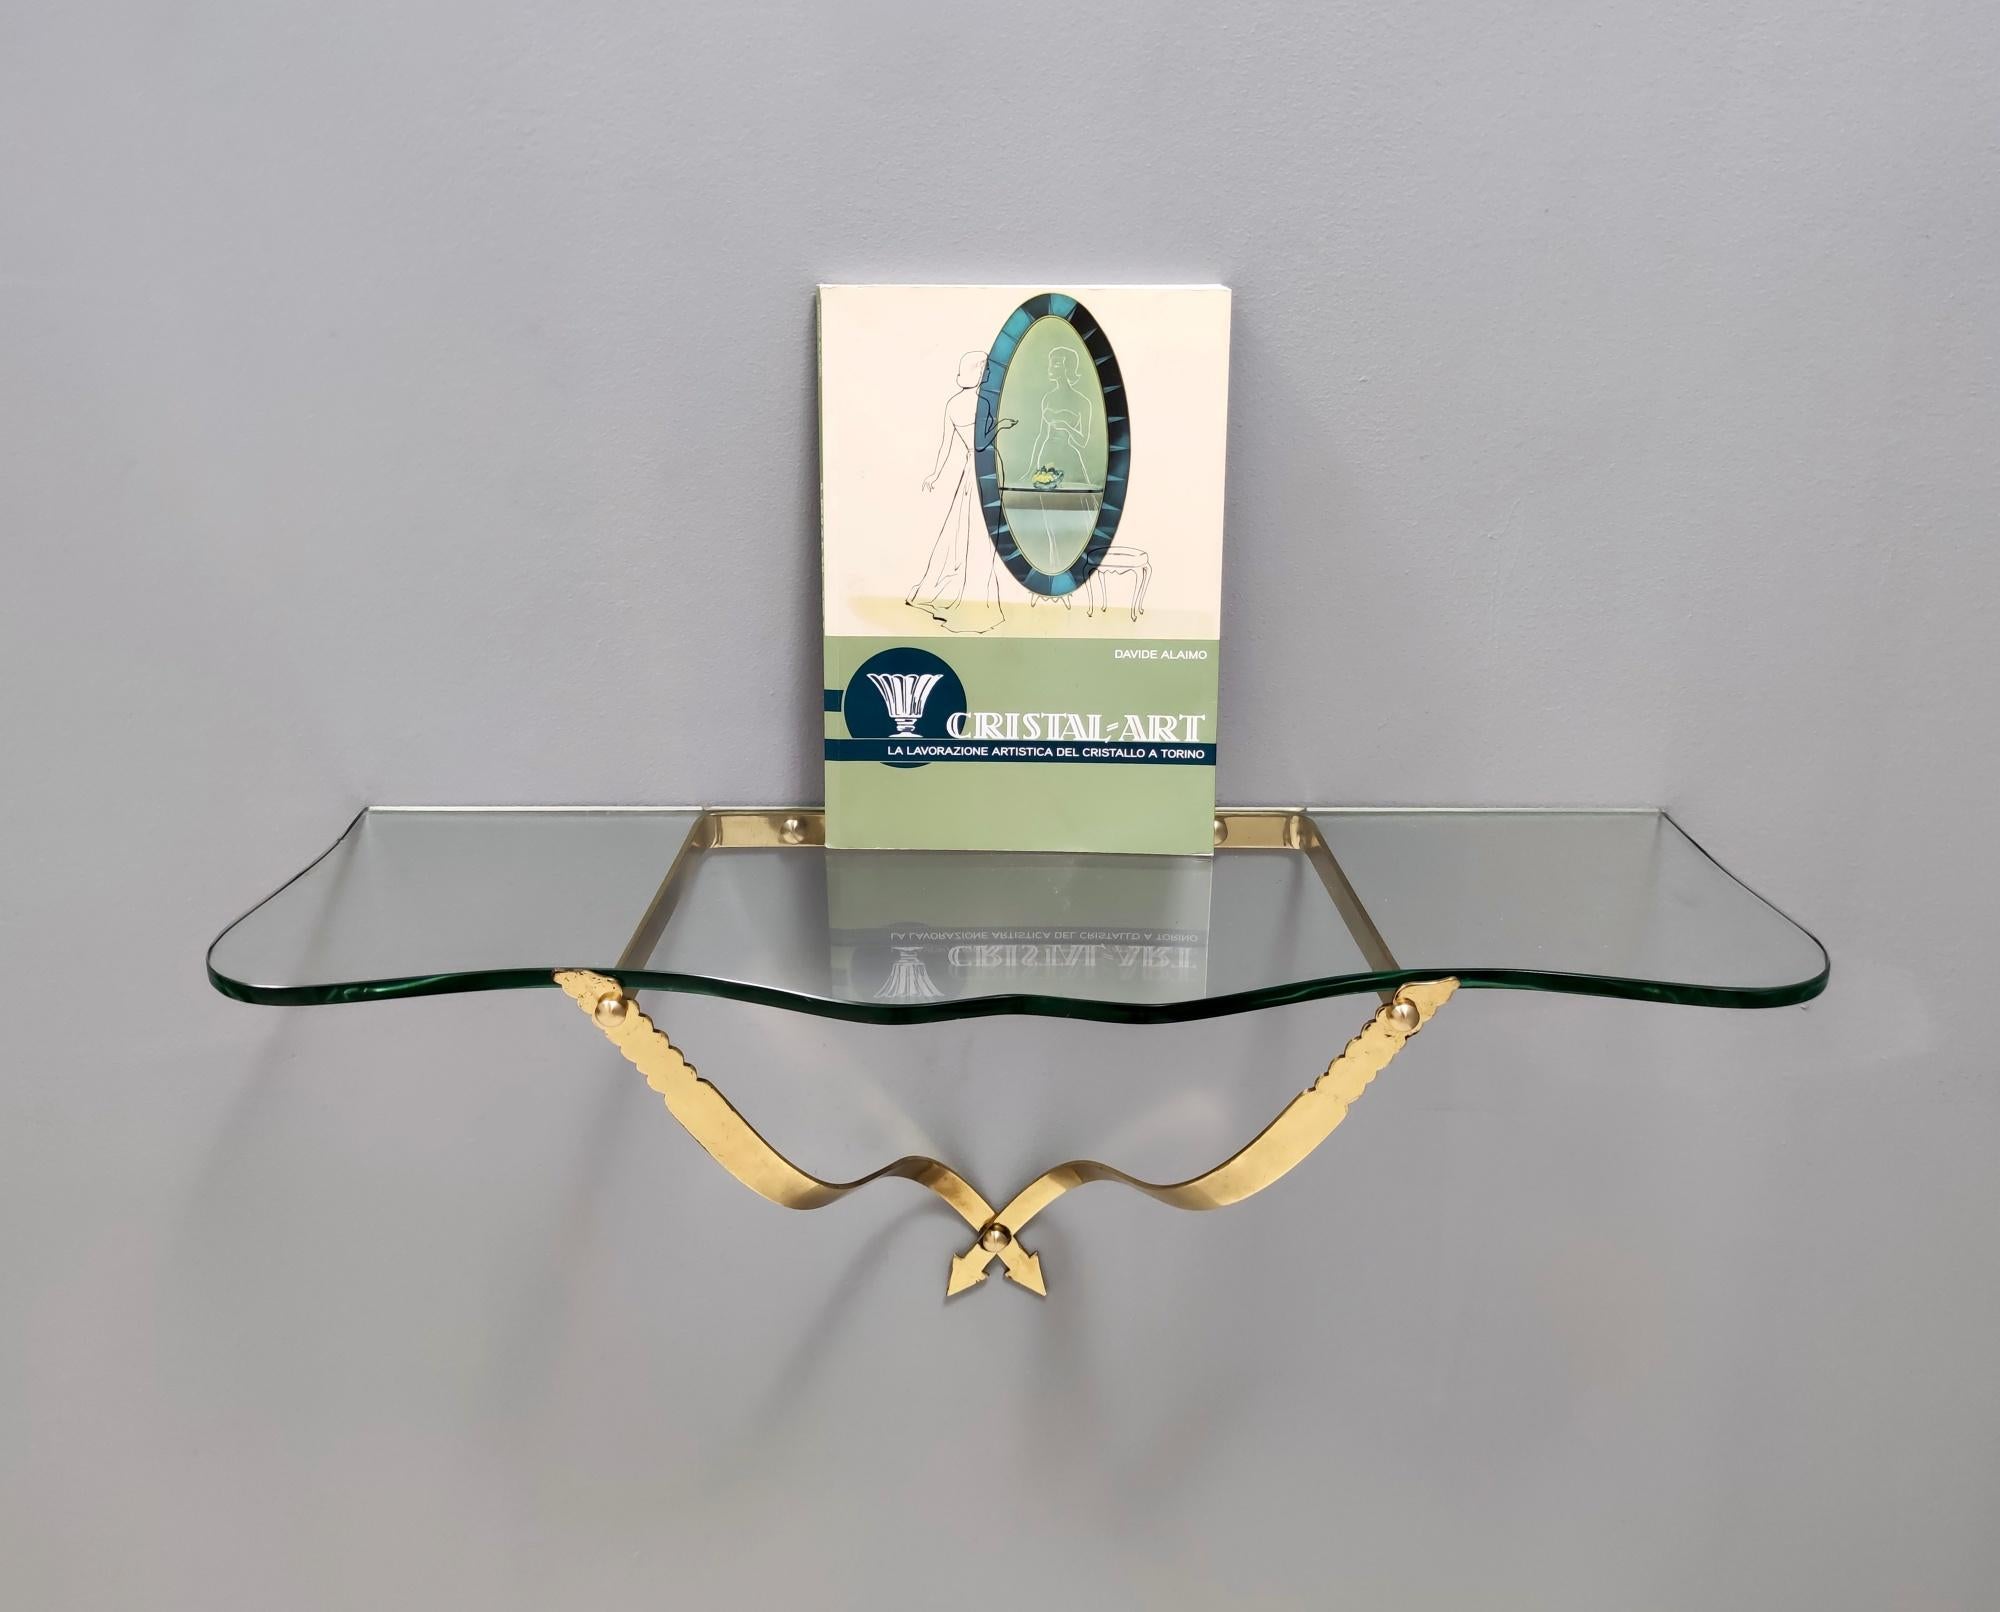 Italian Vintage Crystal and Brass Wall-Mounted Console Table by Cristal Art, Turin Italy